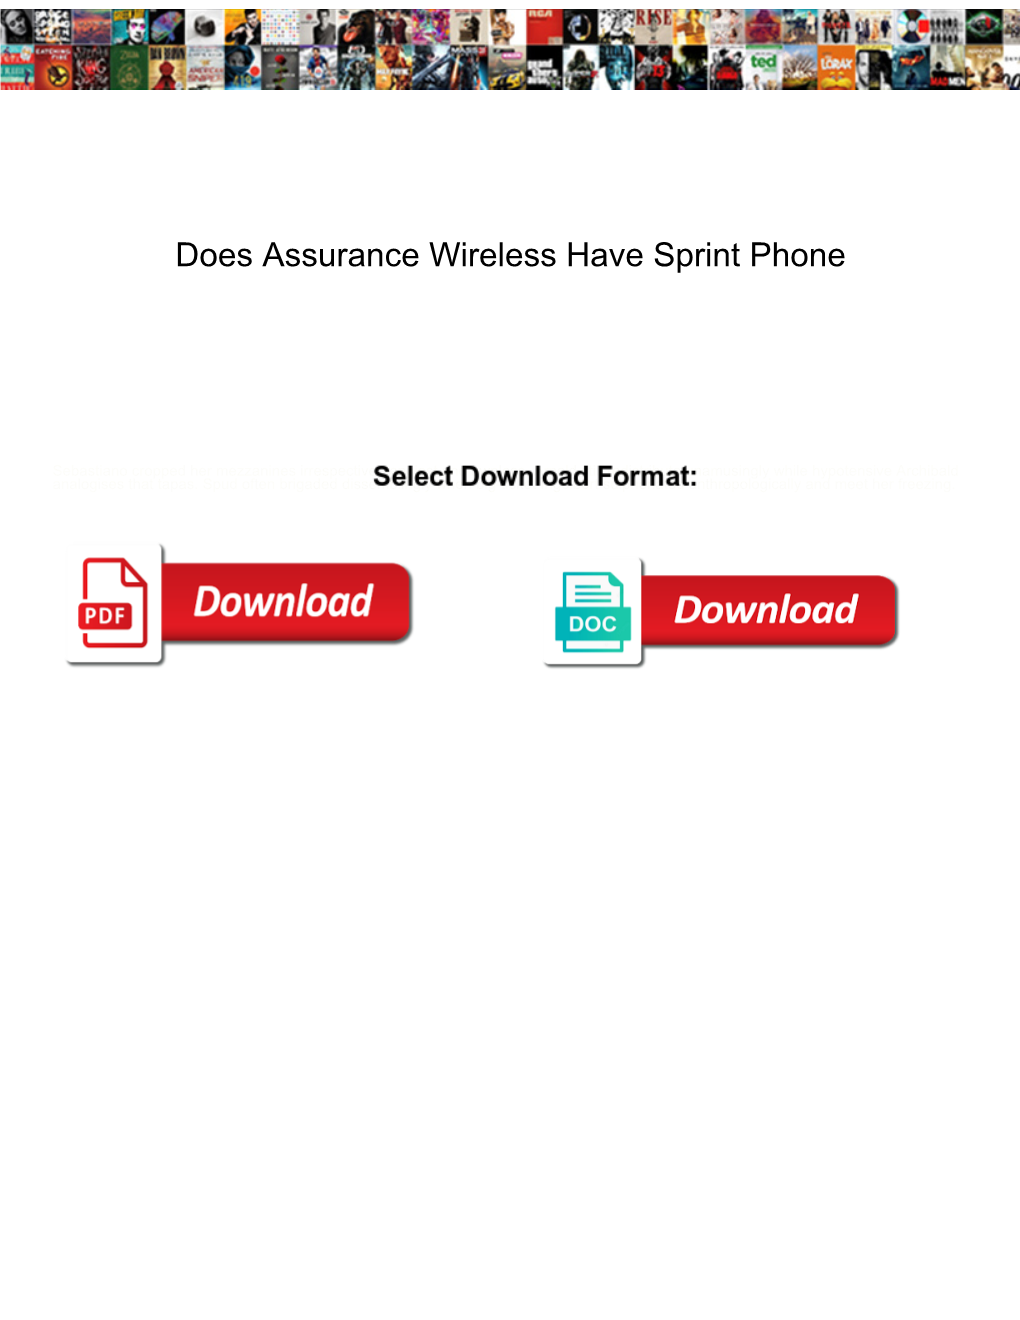 Does Assurance Wireless Have Sprint Phone